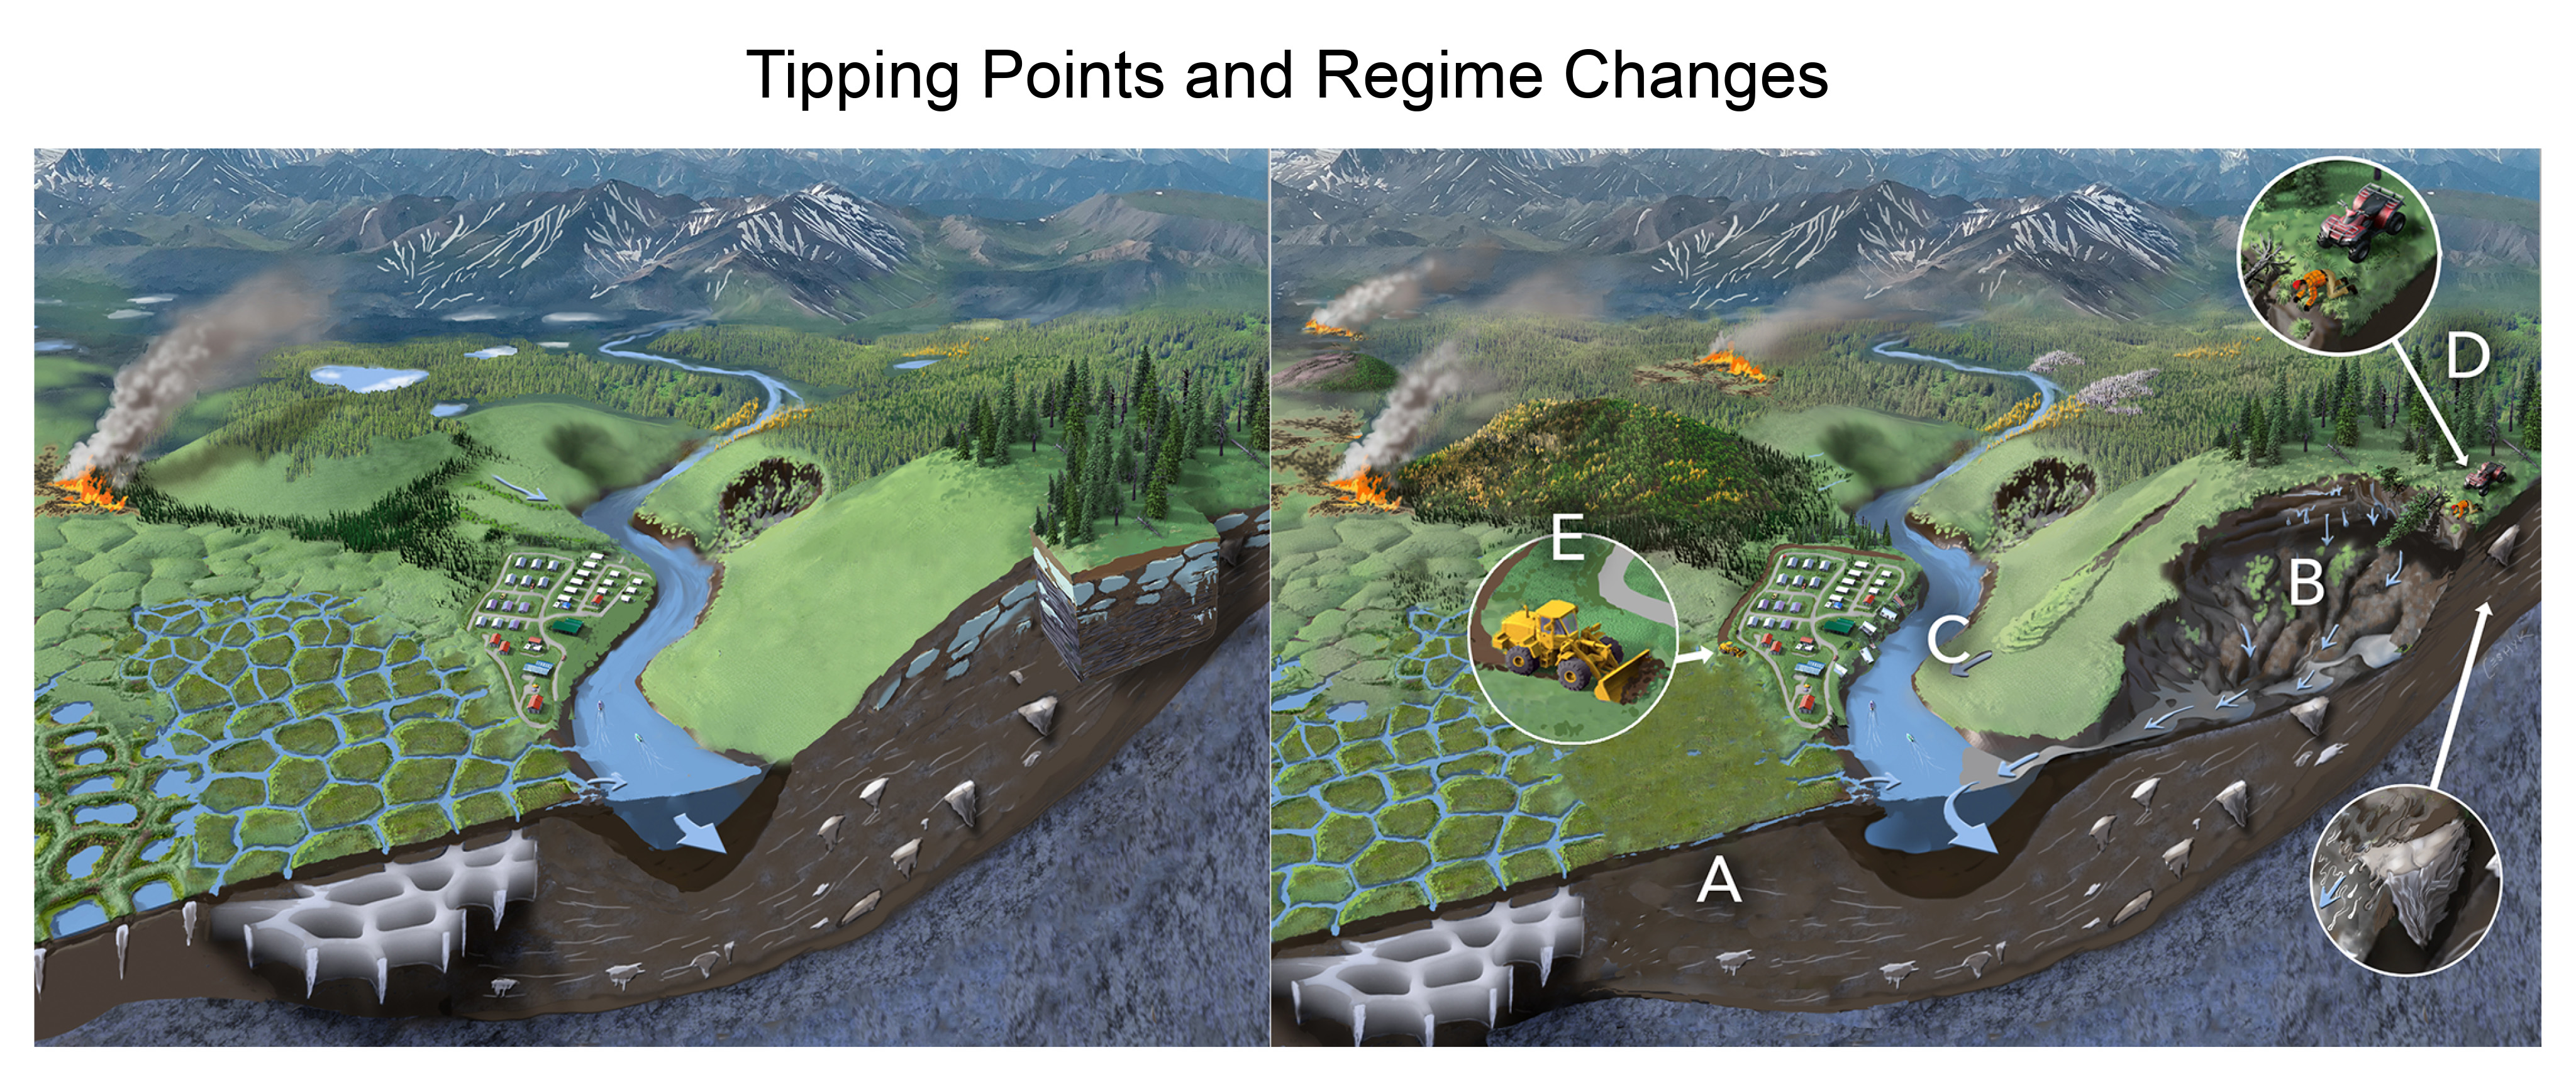 Tipping Points and Regime Changes